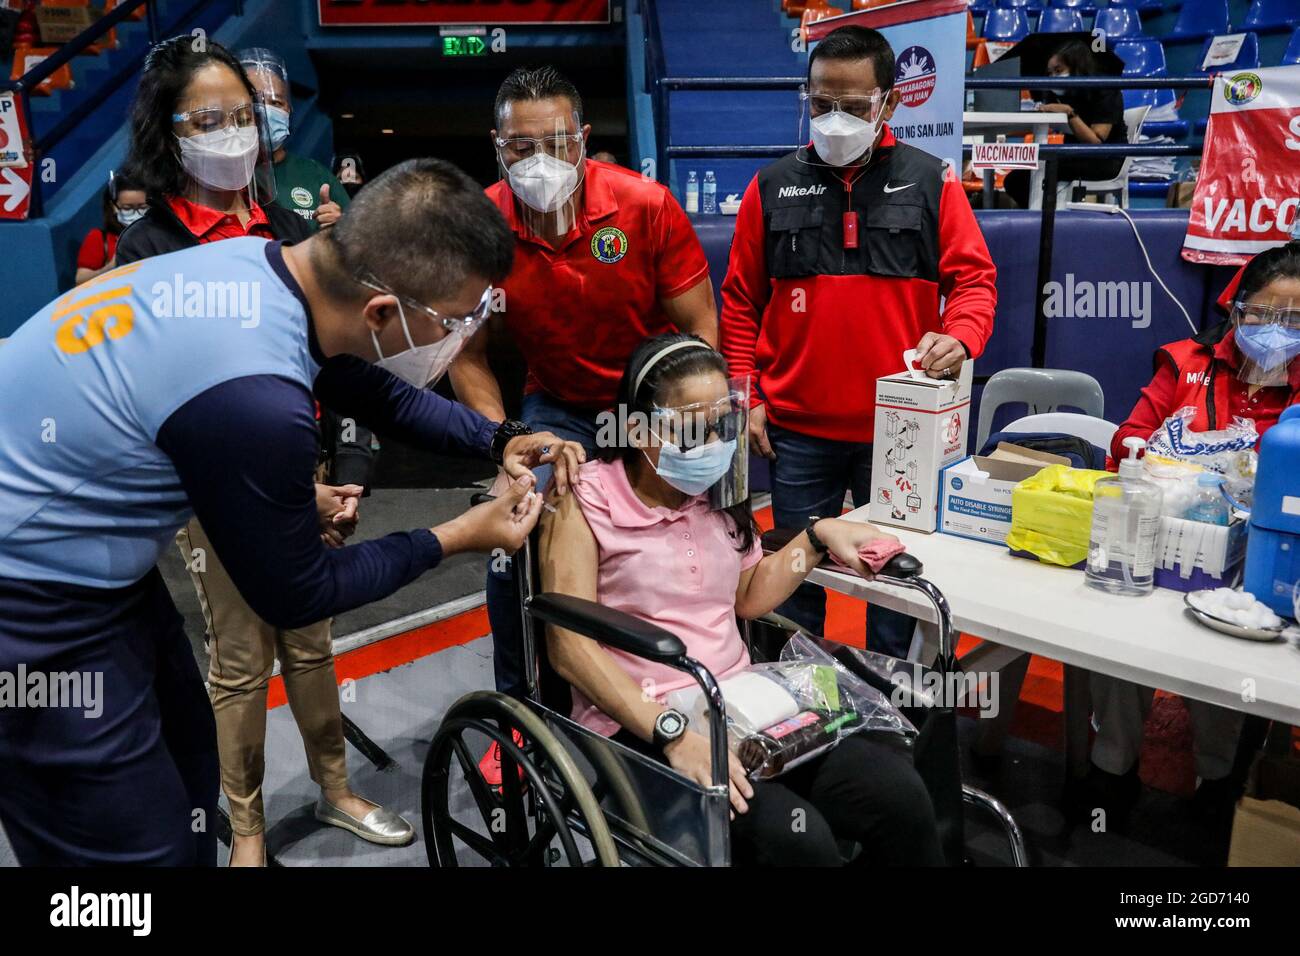 Medical workers inoculate persons with disabilities with the Johnson & Johnson COVID-19 vaccine at the Filoil Flying-V Arena in San Juan City. Philippine officials said a local transmission of the highly contagious delta variant of the COVID-19 virus has been detected in the country and announced tighter quarantine restrictions in the capital and a ban on the entry of travelers from hard-hit Malaysia and Thailand. Metro Manila, Philippines. Stock Photo